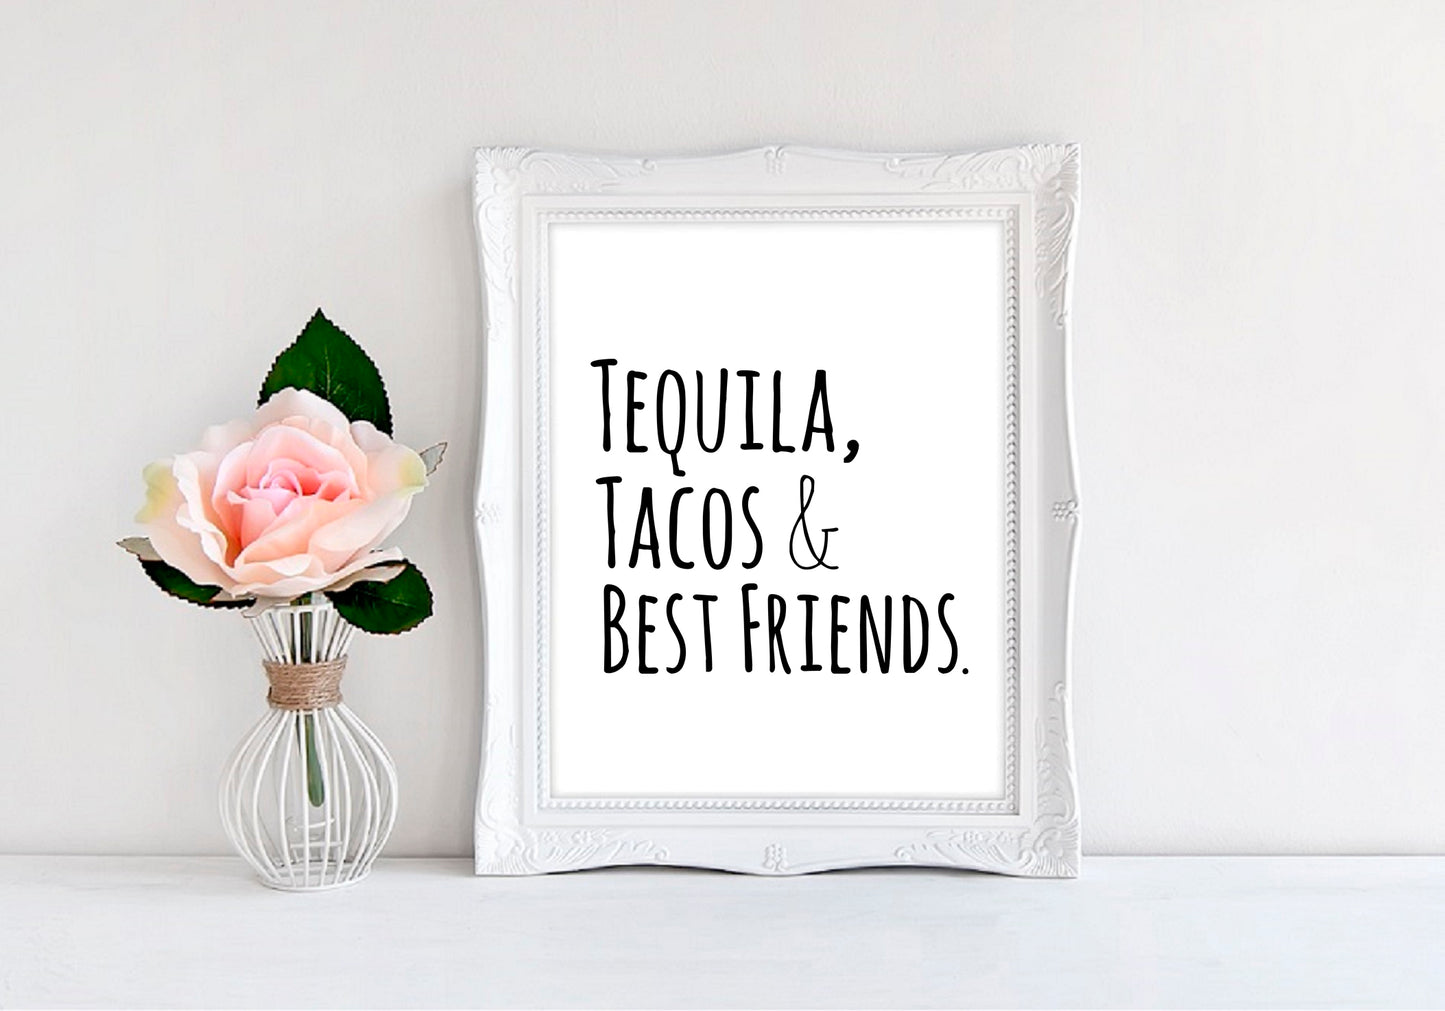 Tequila Tacos And Best Friends - 8"x10" Wall Print - MoonlightMakers